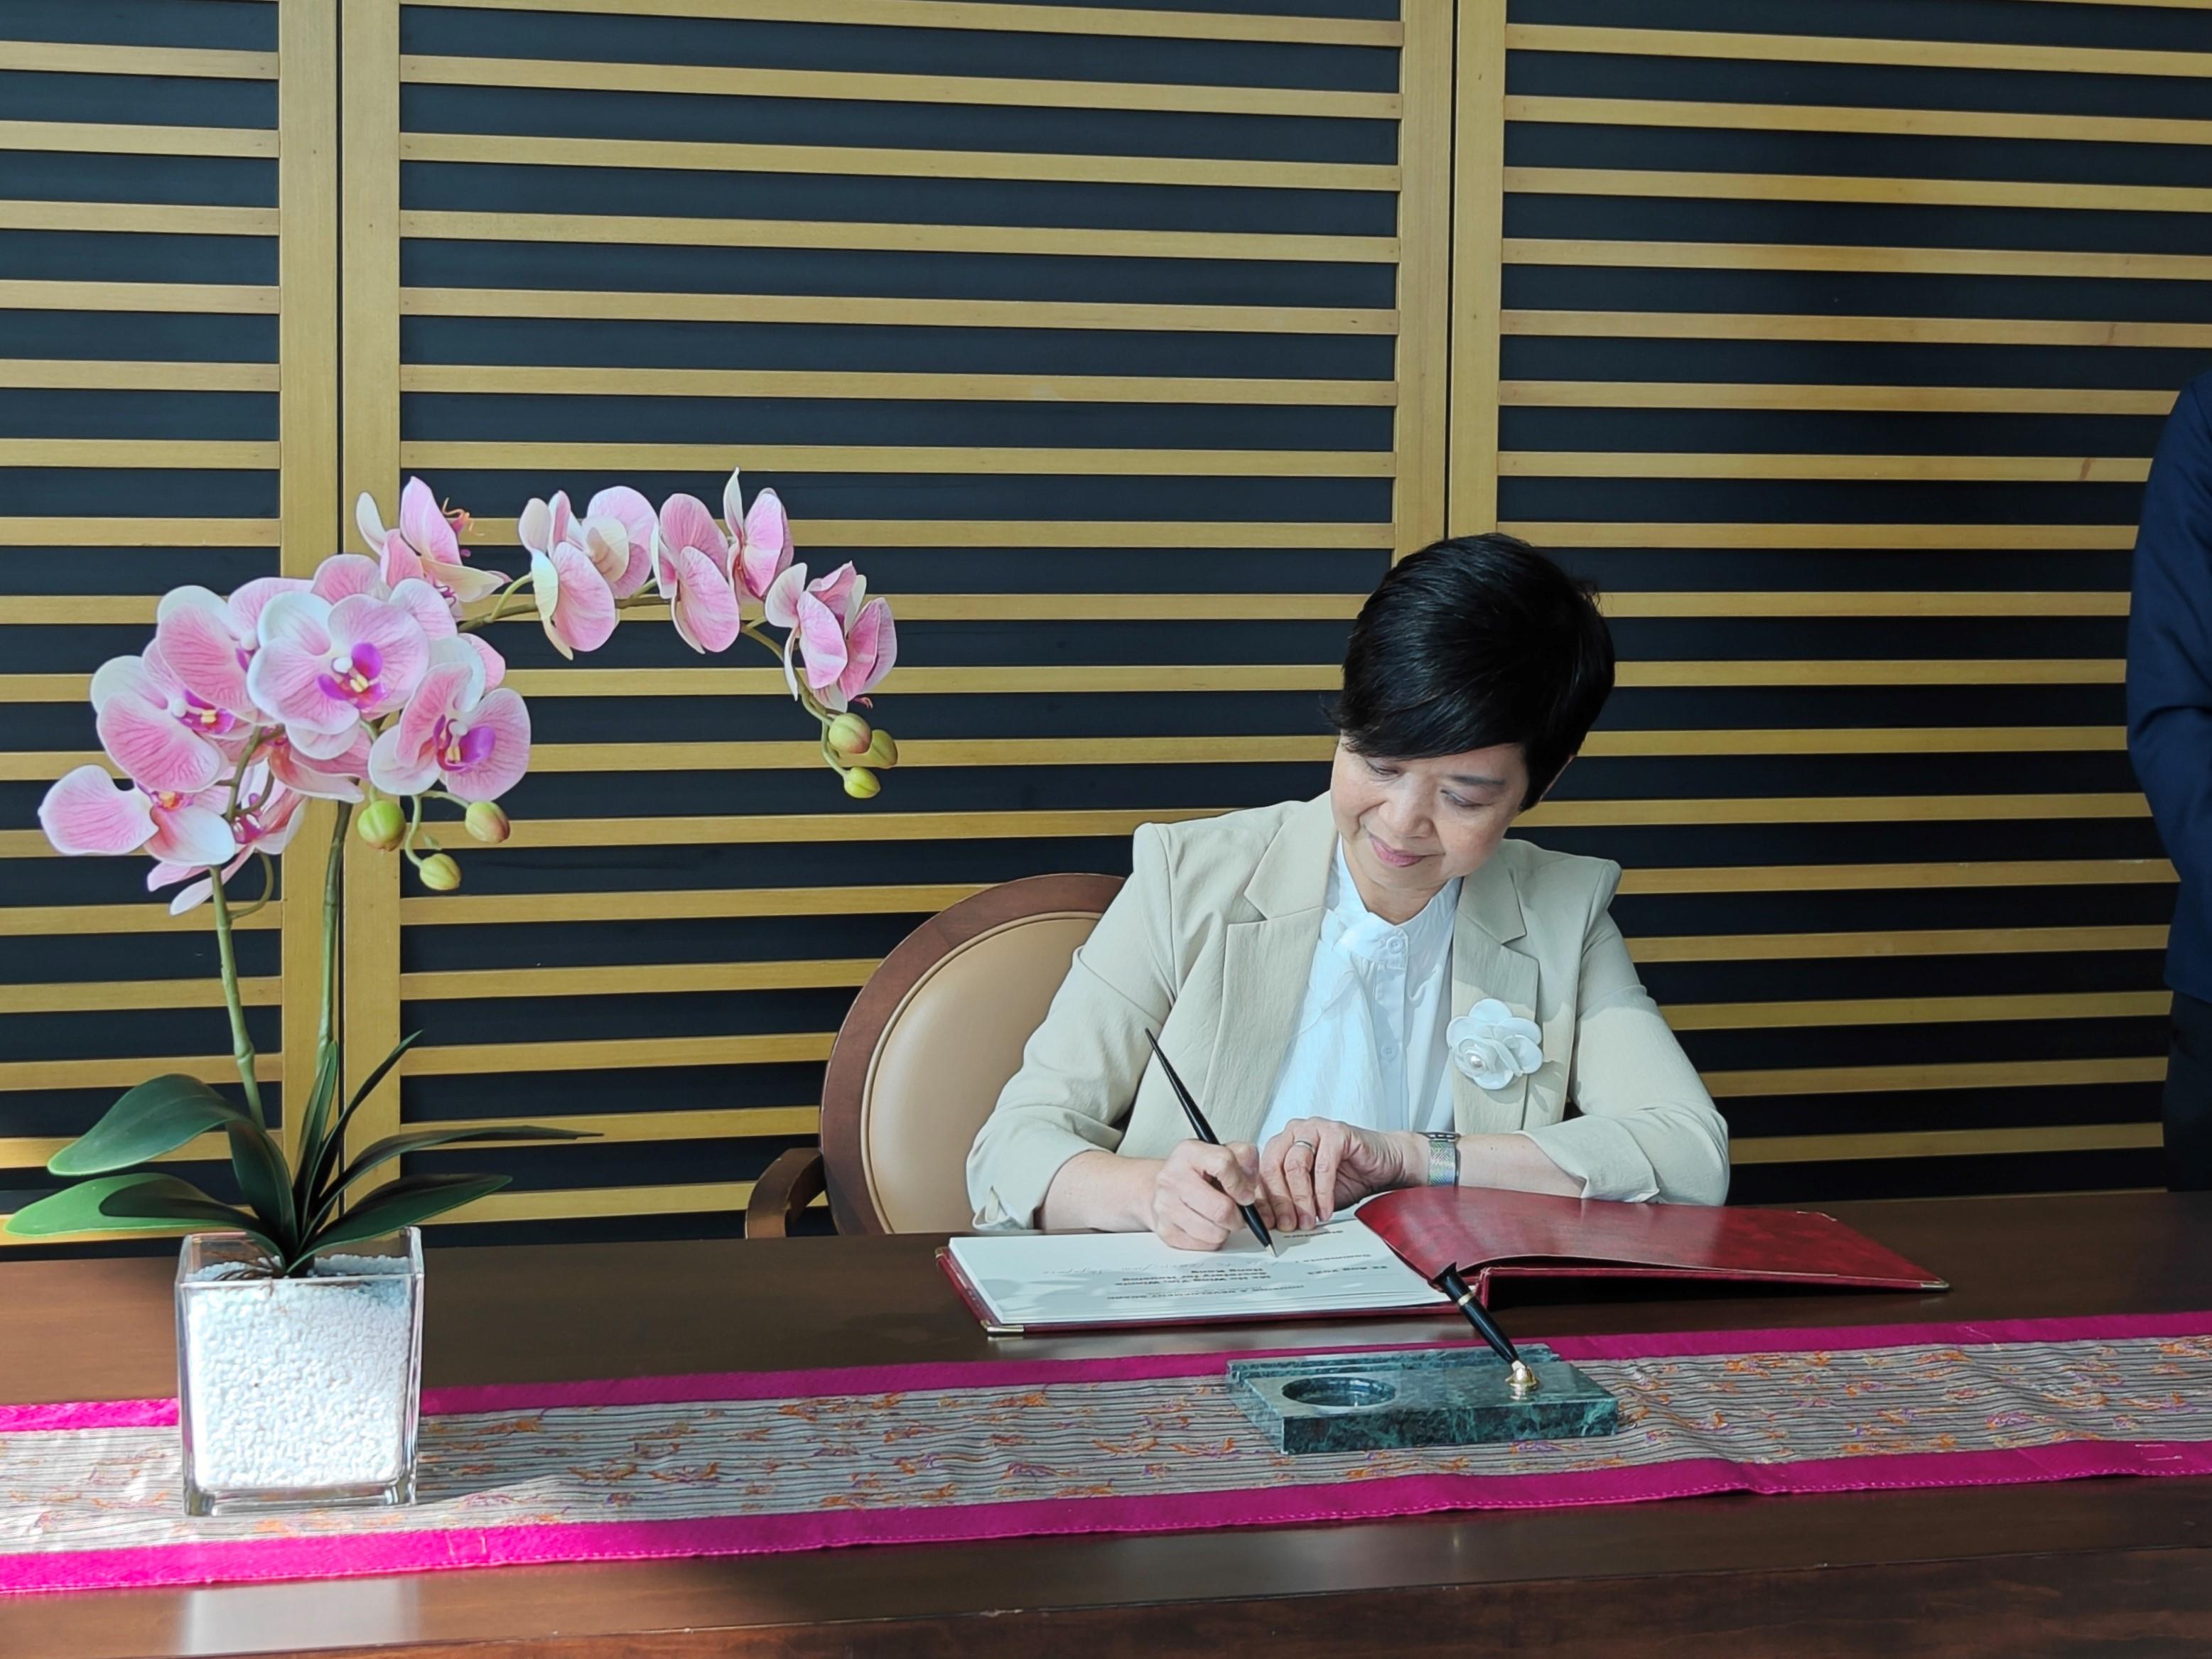 The Secretary for Housing, Ms Winnie Ho, began her visit to Singapore yesterday (August 22). She met with local government officials to exchange views in areas such as housing policies, innovative construction technologies and green building. Photo shows Ms Ho signing the guest book at the Housing & Development Board.